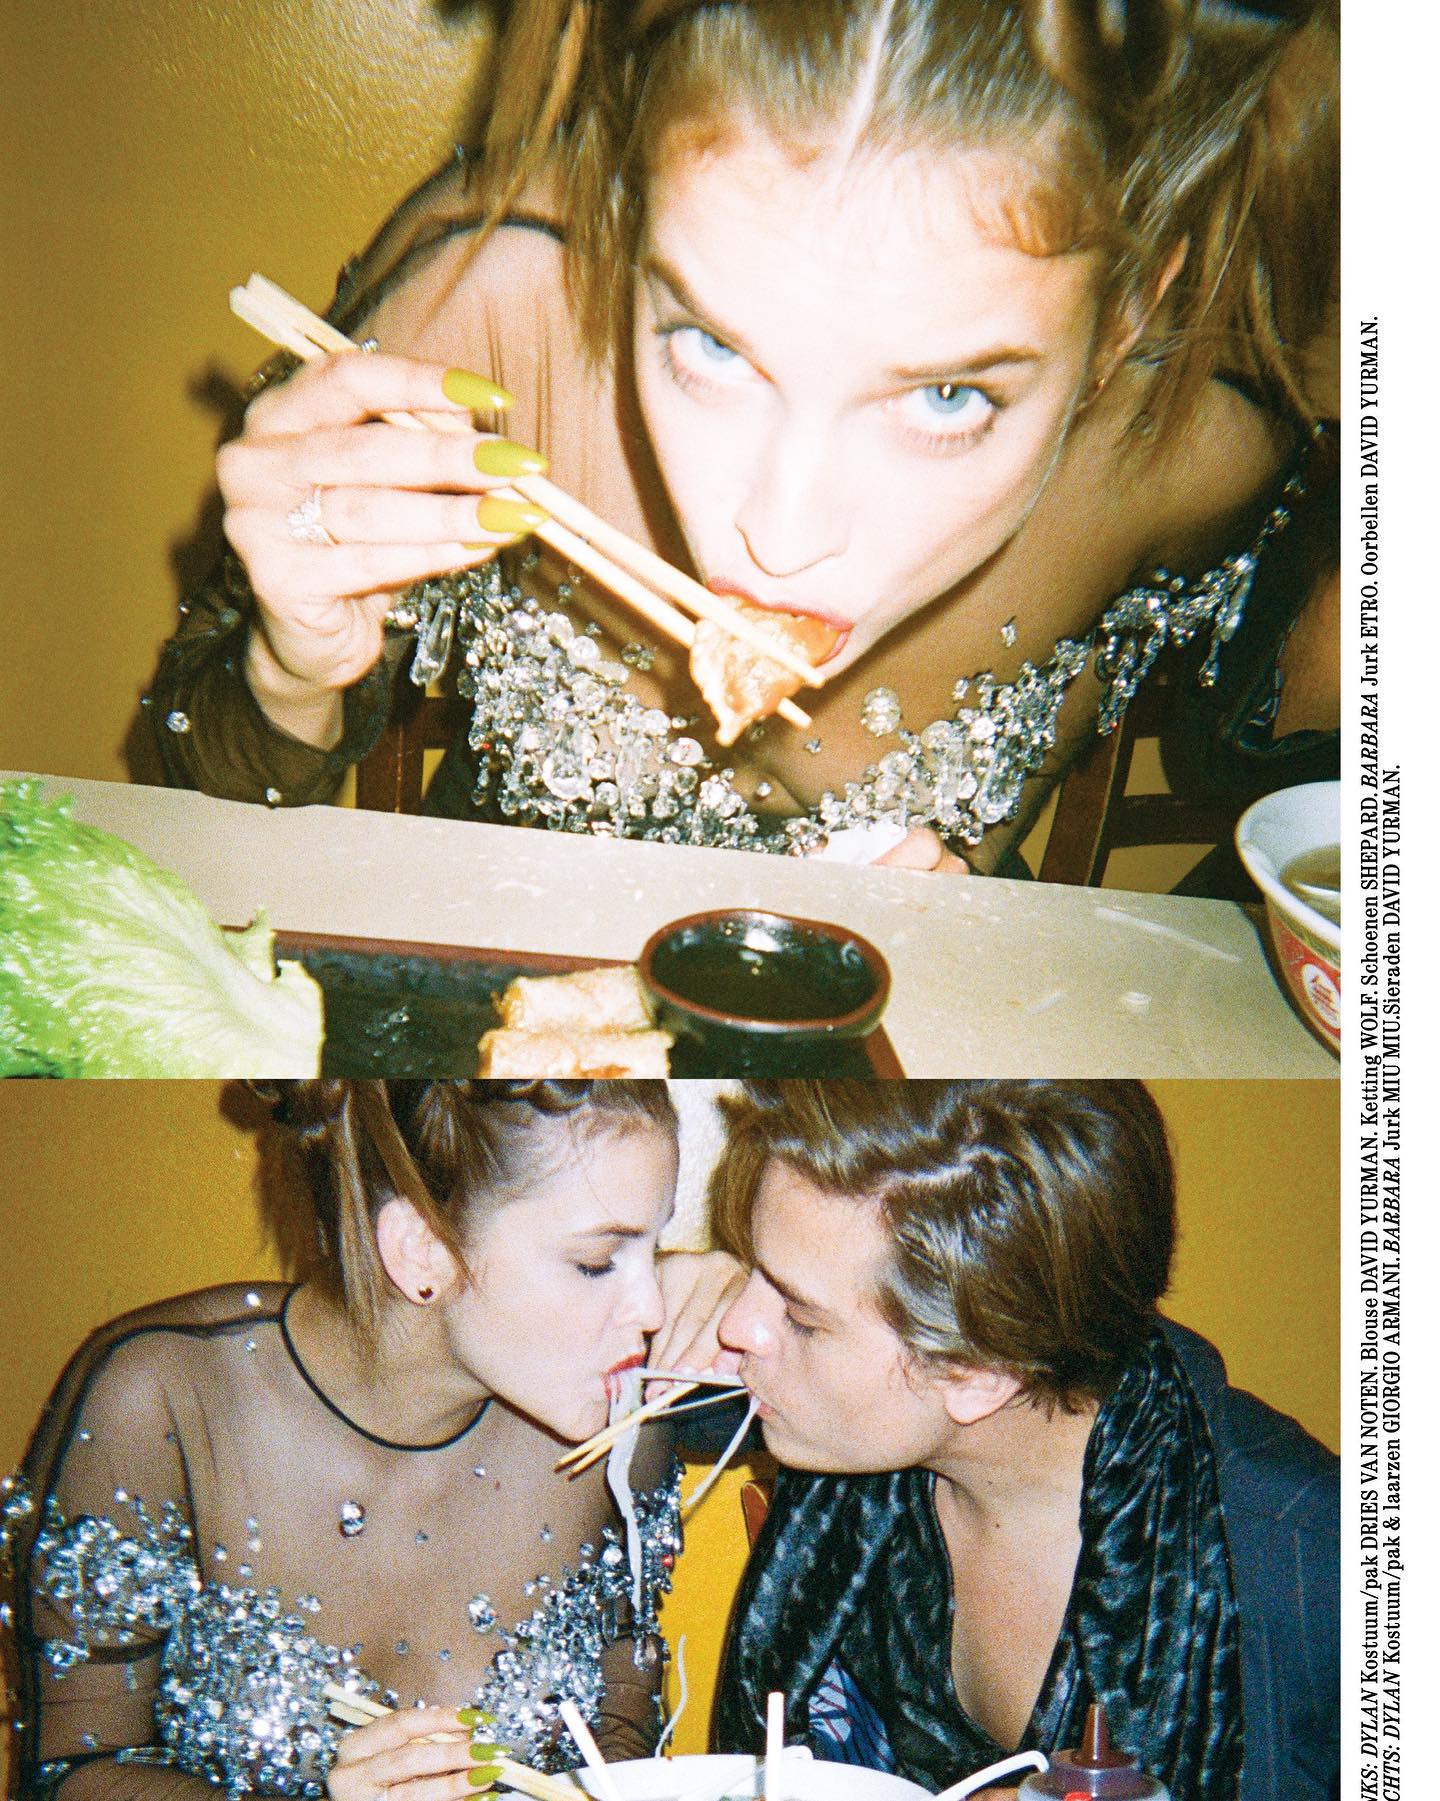 Barbara Palvin et Dylan Sprouse hit the Cover! - Photo 13